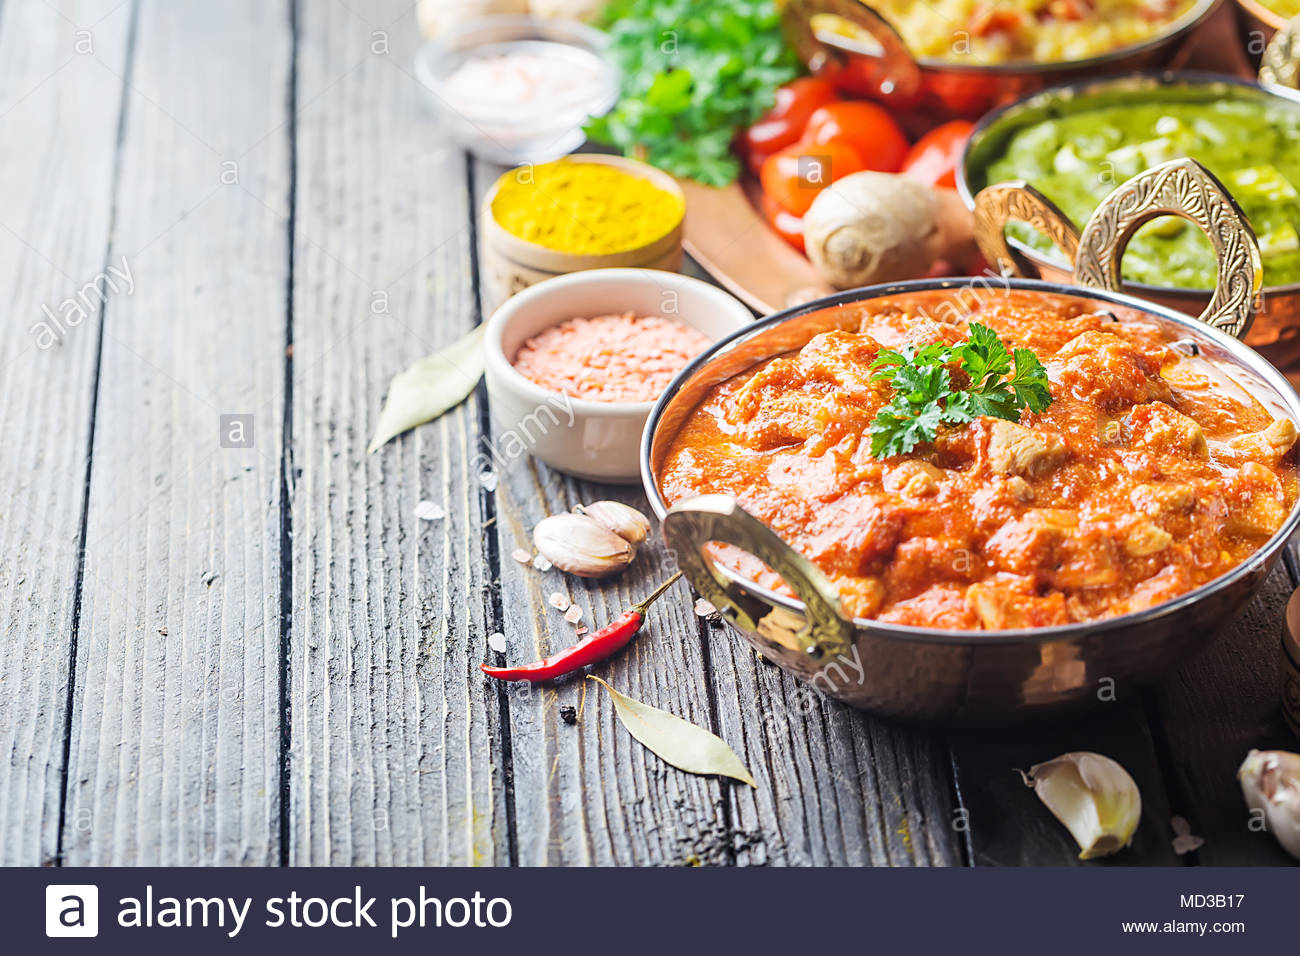 Different Bowls With Assorted Indian Food On Dark Wooden